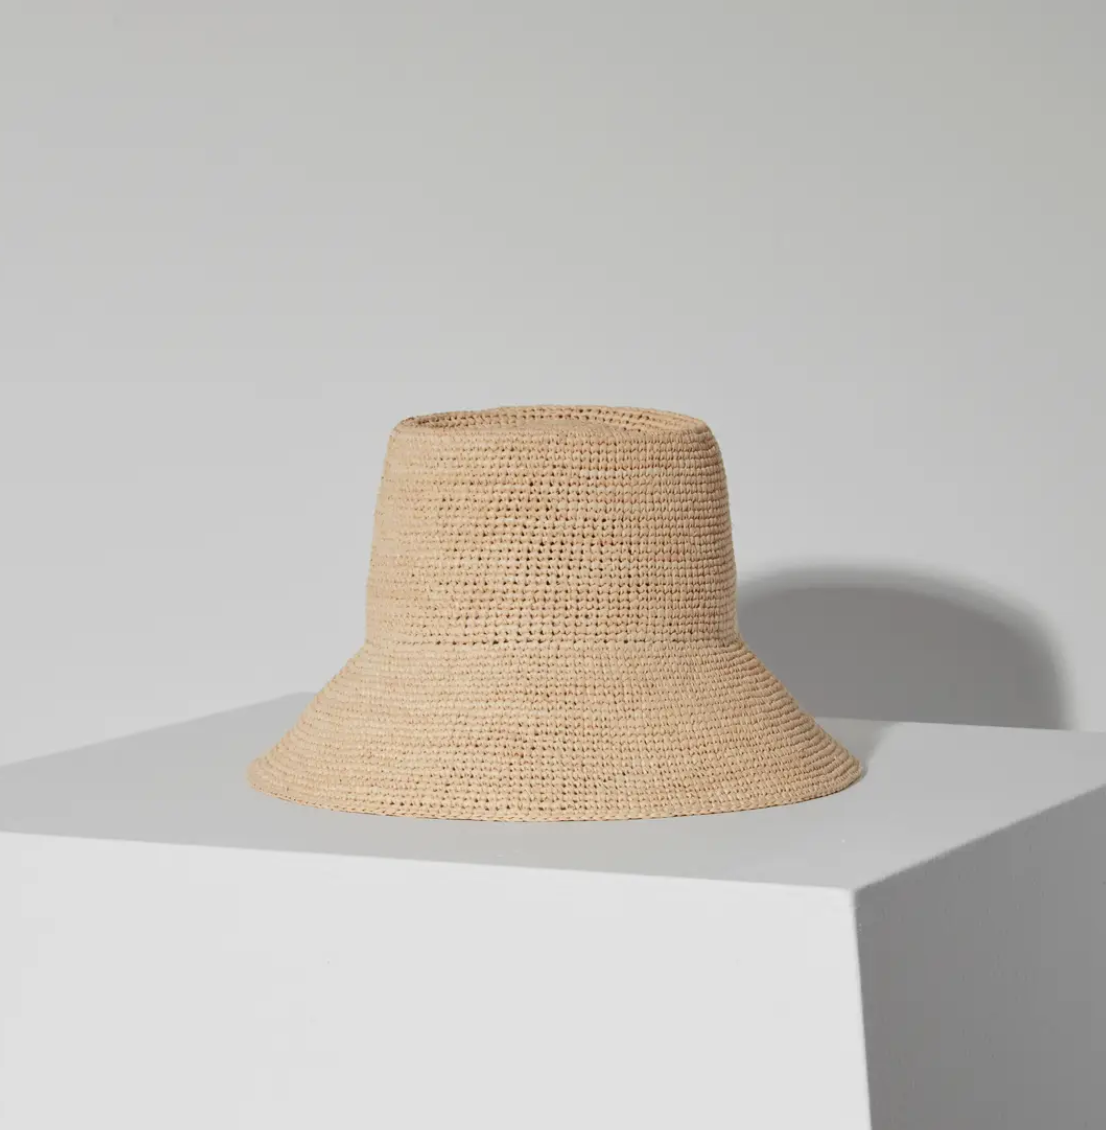 A beige straw Felix Bucket Natural hat in Janessa Leone style displayed on a white pedestal against a plain light grey background, illuminated by soft lighting.